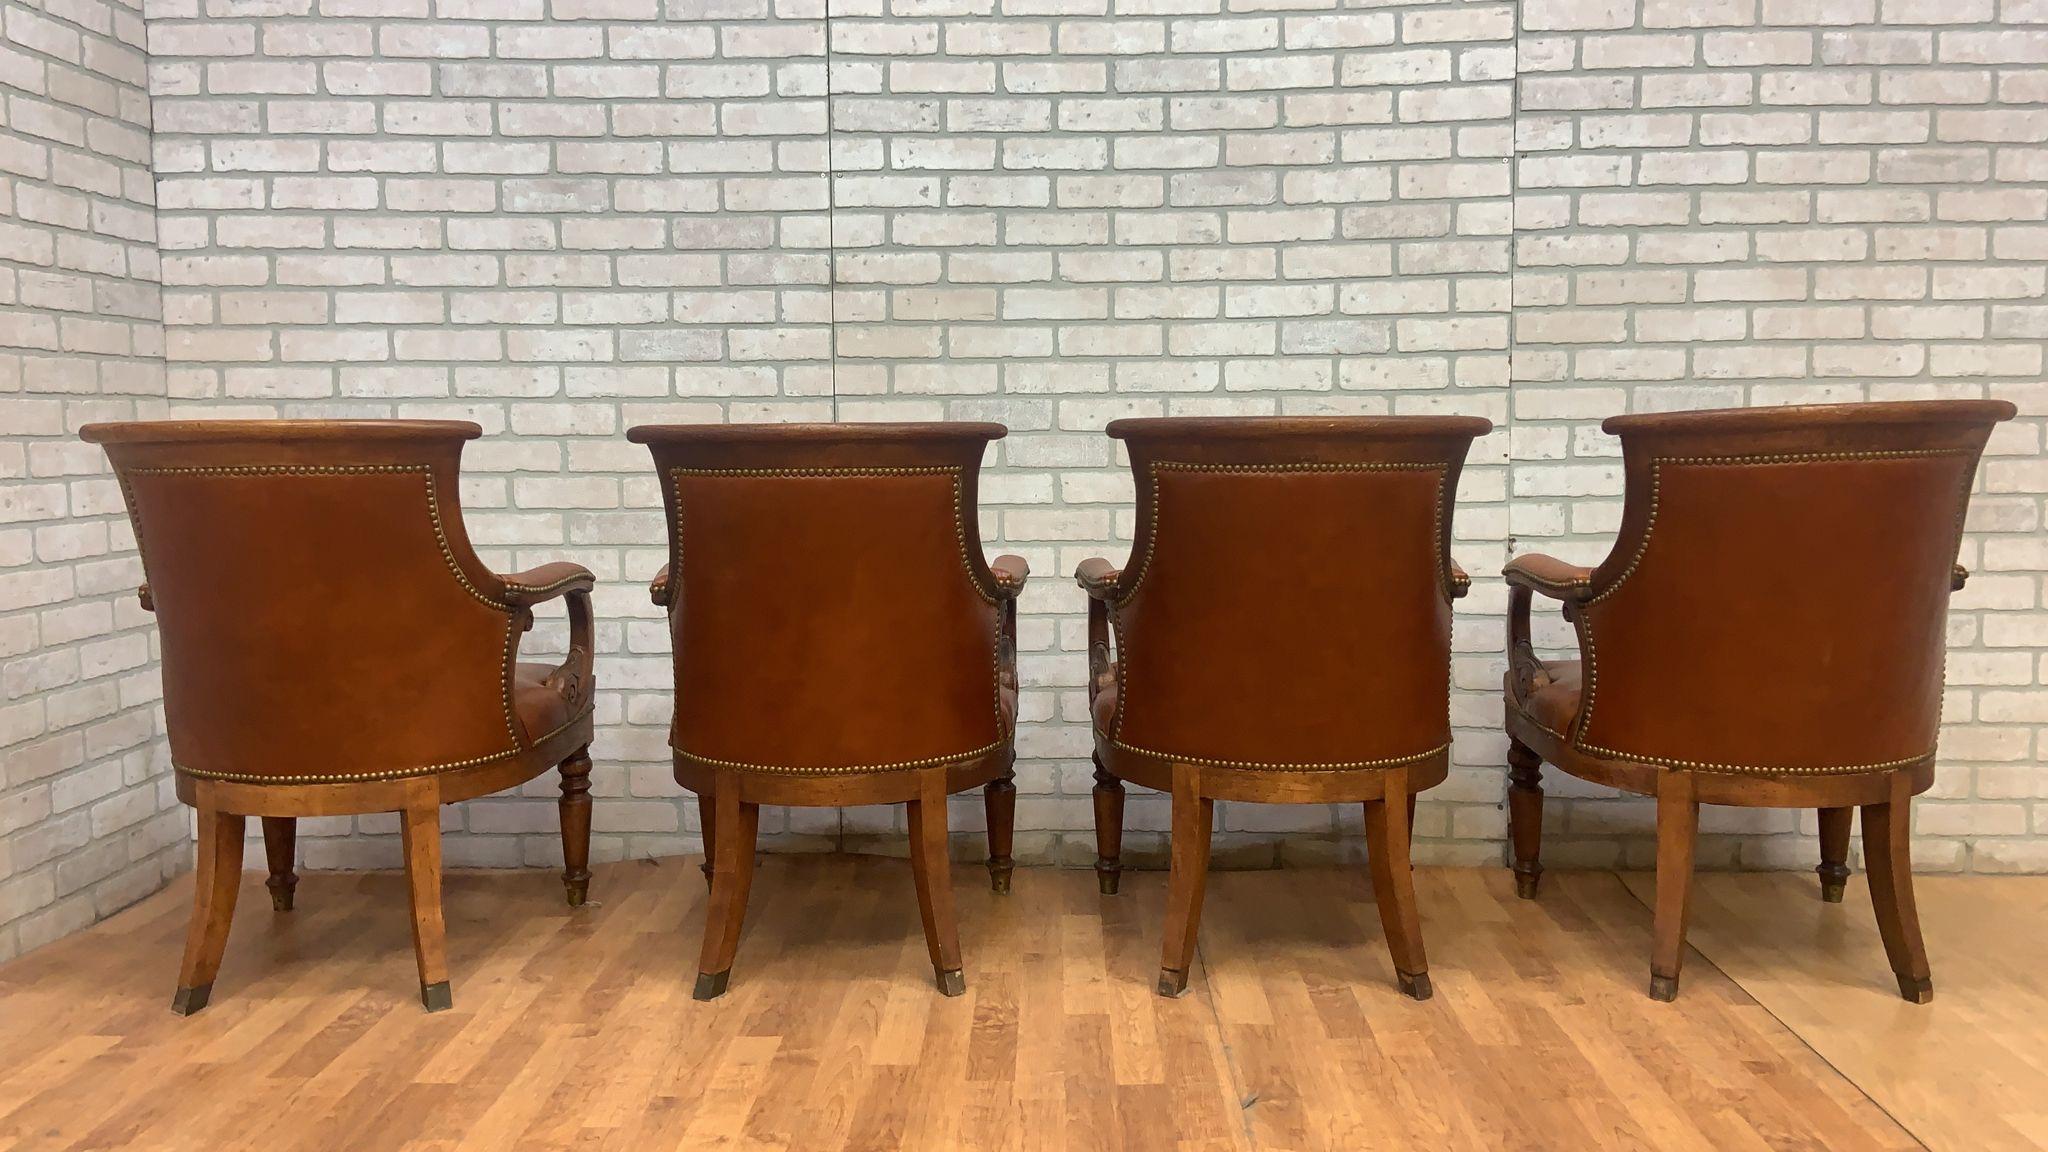 Hand-Carved Vintage Hancock and Moore Tufted Jockey Club Chair Newly Upholstered - Set of 4